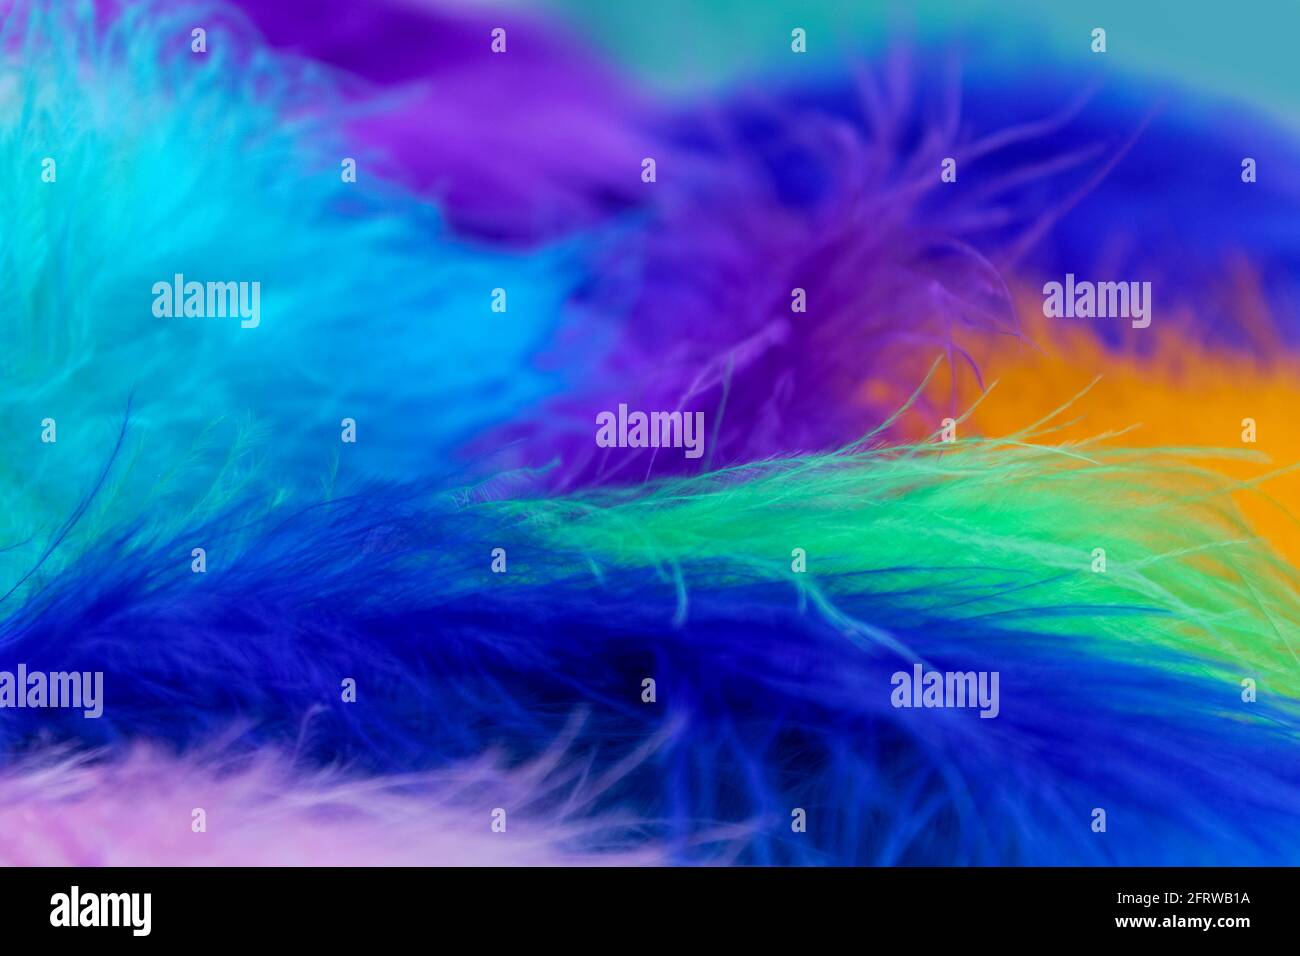 colorful fluffy soft and beautiful background or computer wallpaper Stock Photo